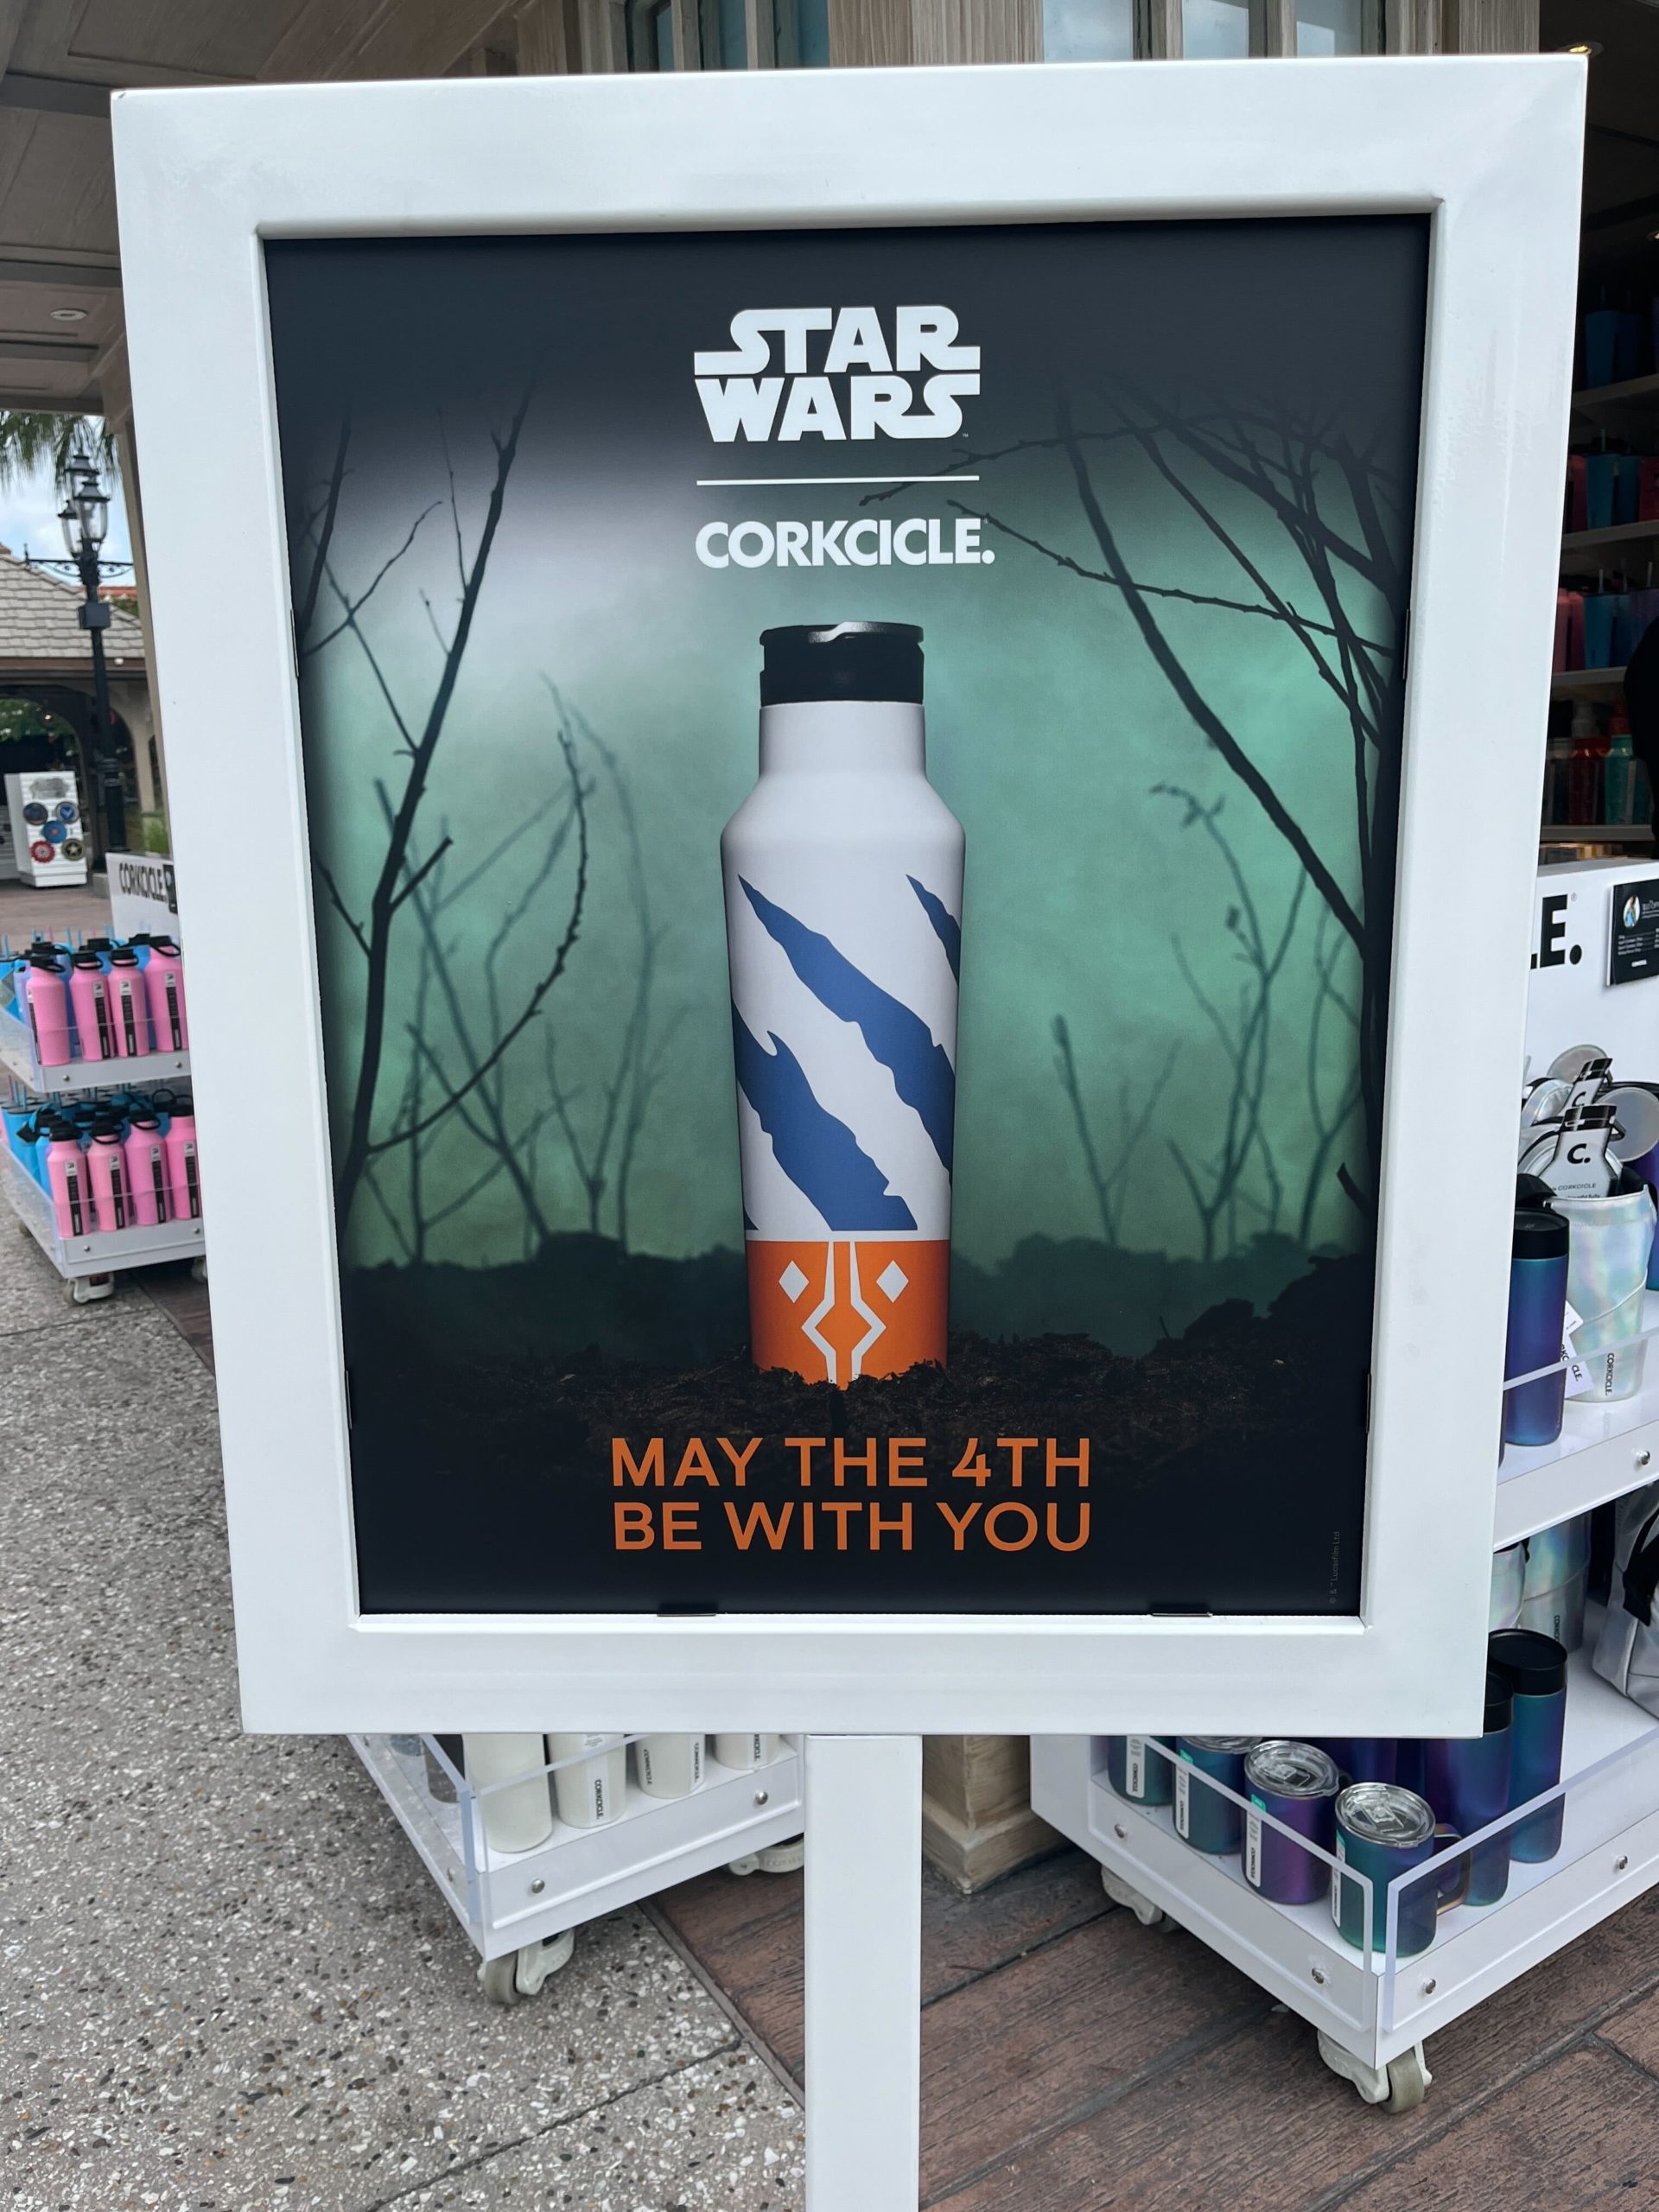 Get Star Wars, Marvel, Disney drink containers from Corkcicle